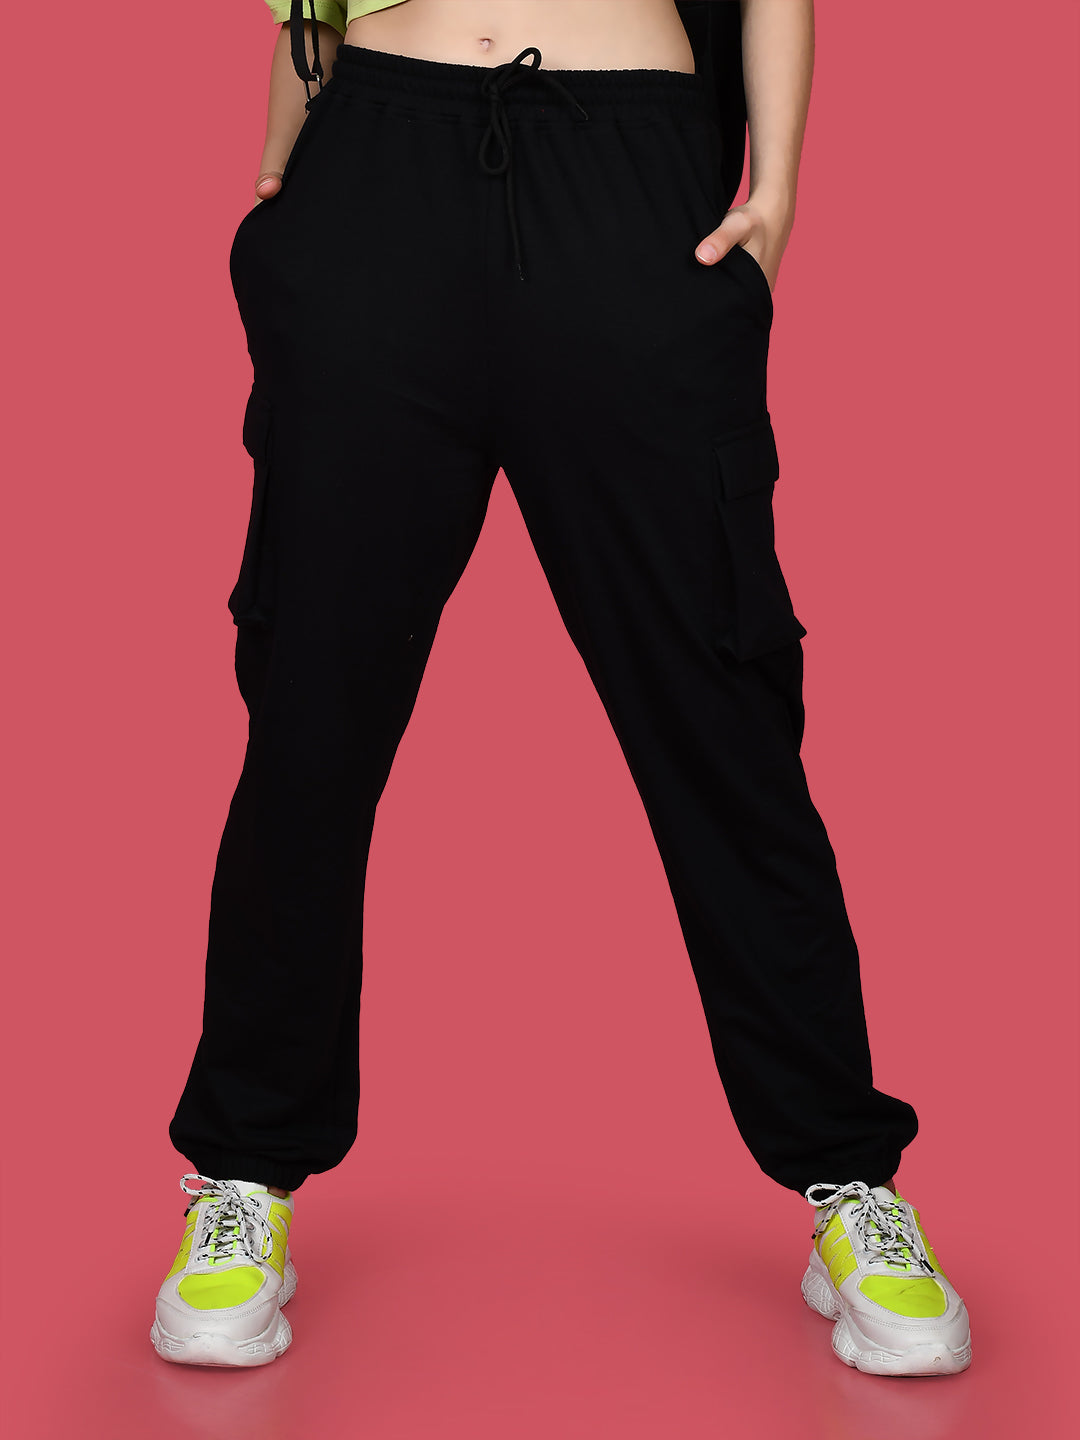 Black Solid Elasticated Joggers For Women